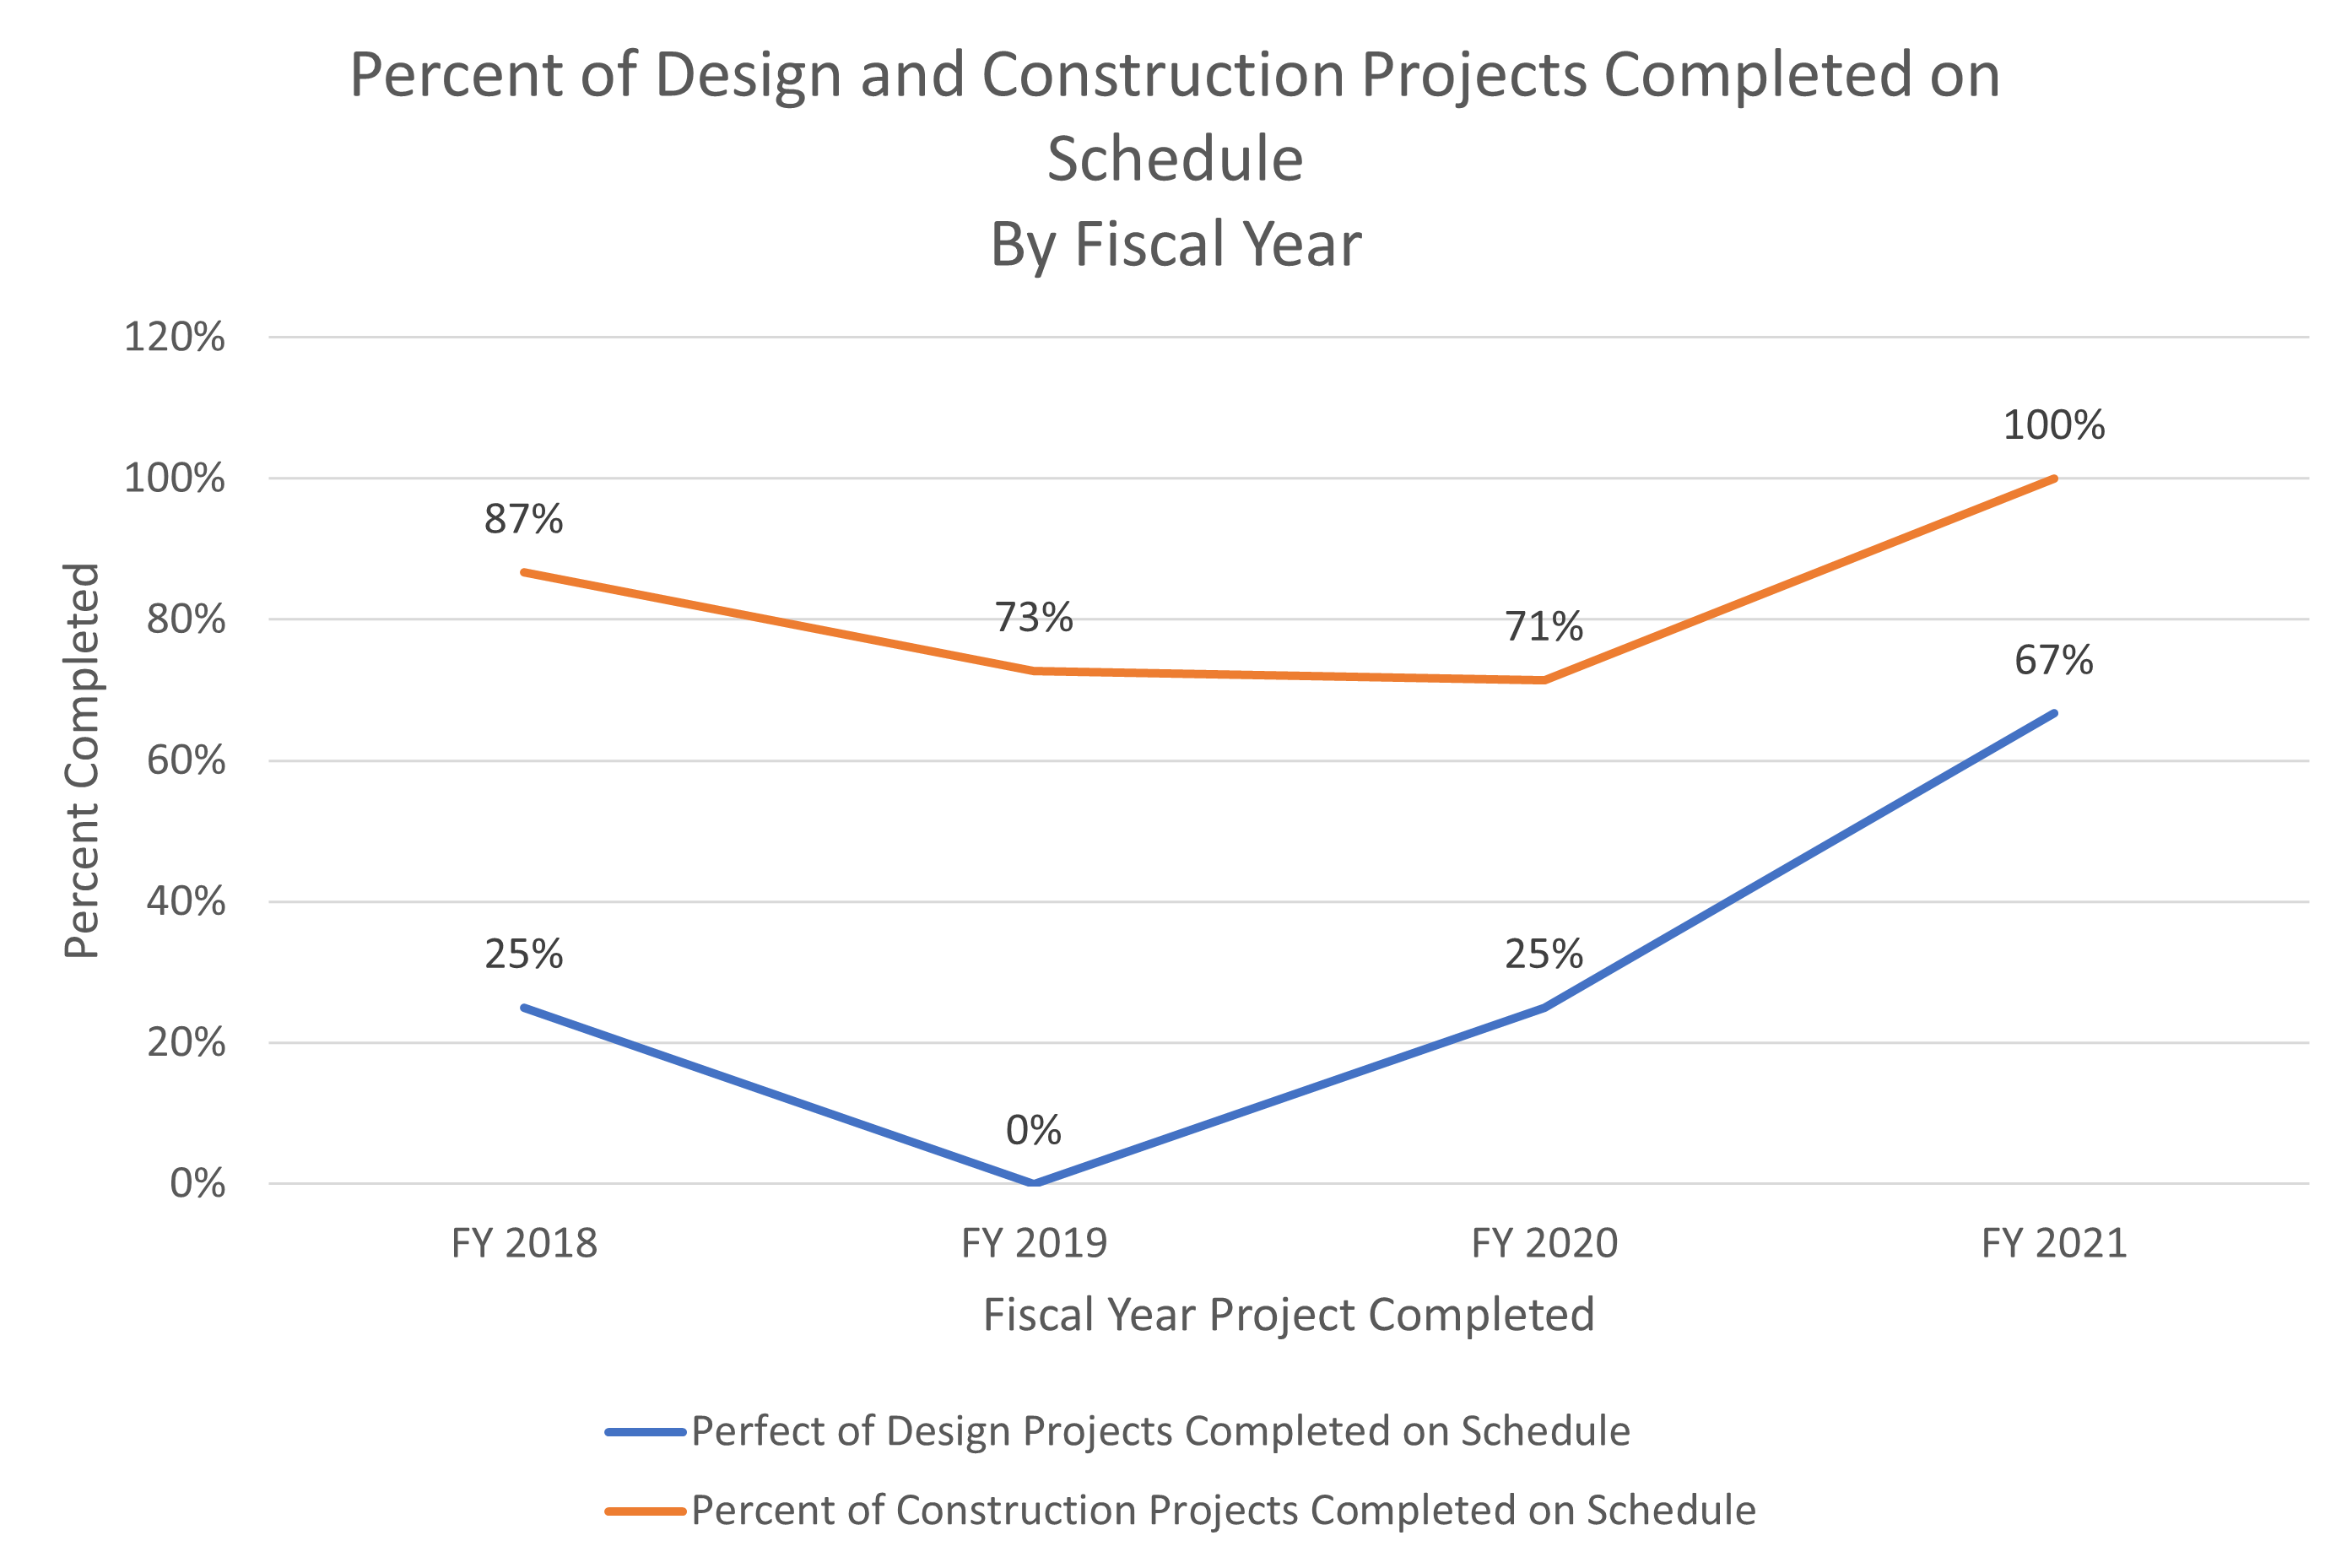 DPI FY 21 Performance Measure - Projects Completed on Schedule